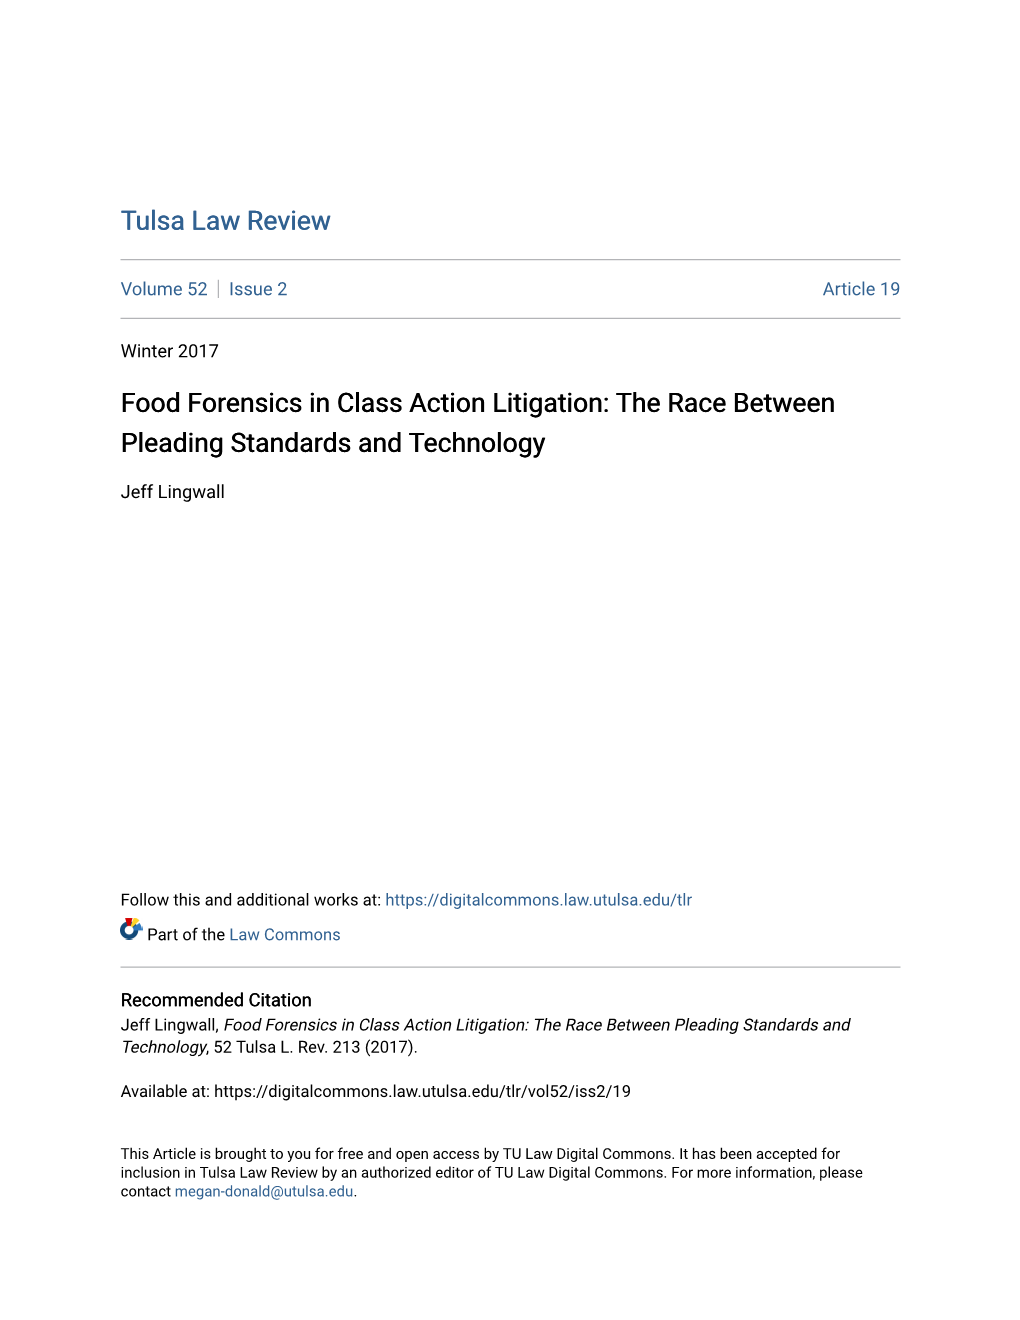 Food Forensics in Class Action Litigation: the Race Between Pleading Standards and Technology